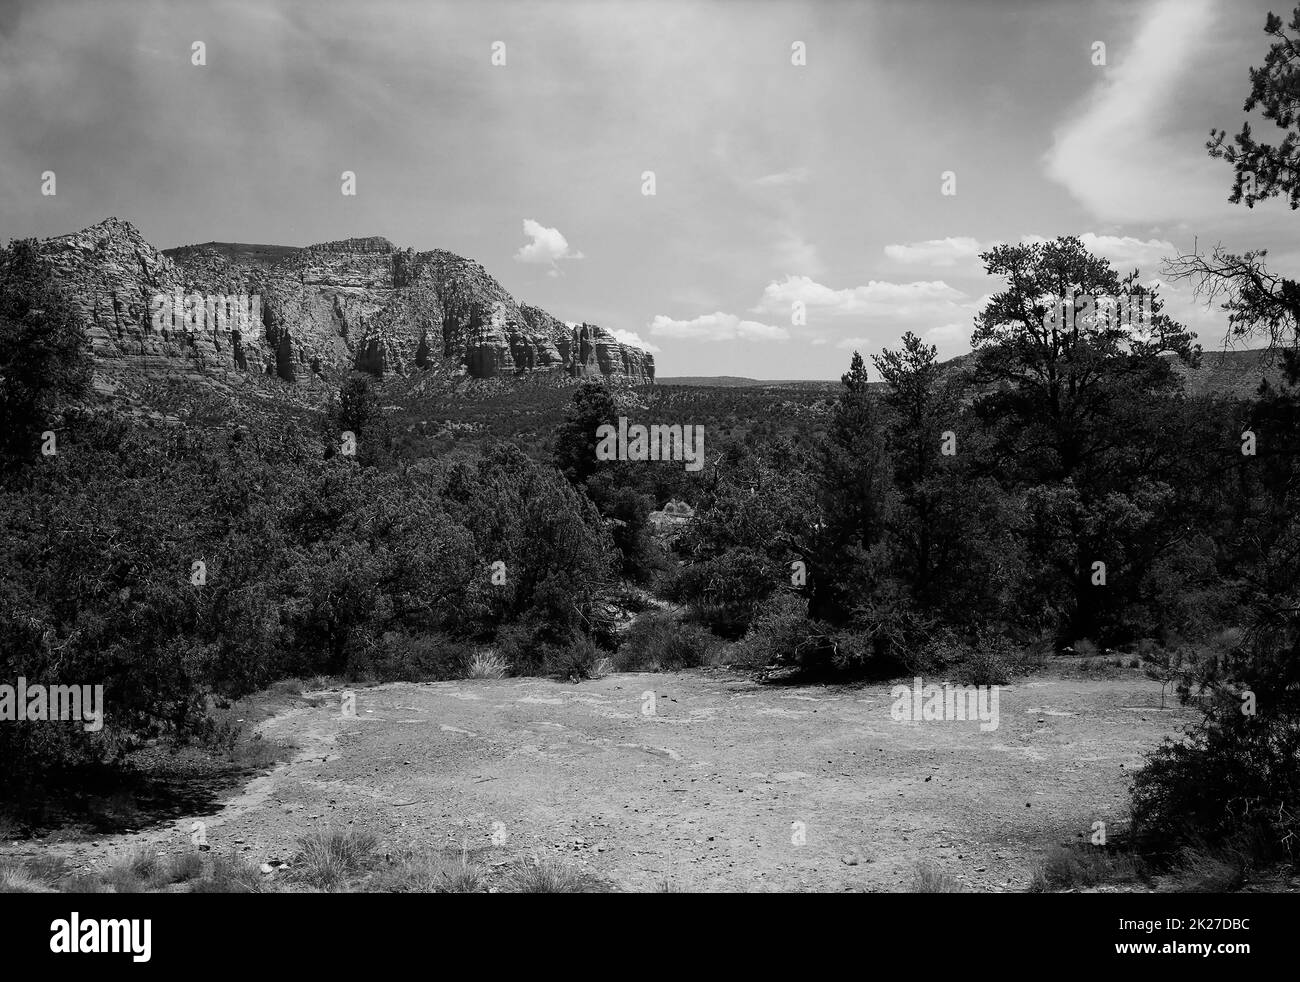 Sedona Red Rock Country Banque D'Images